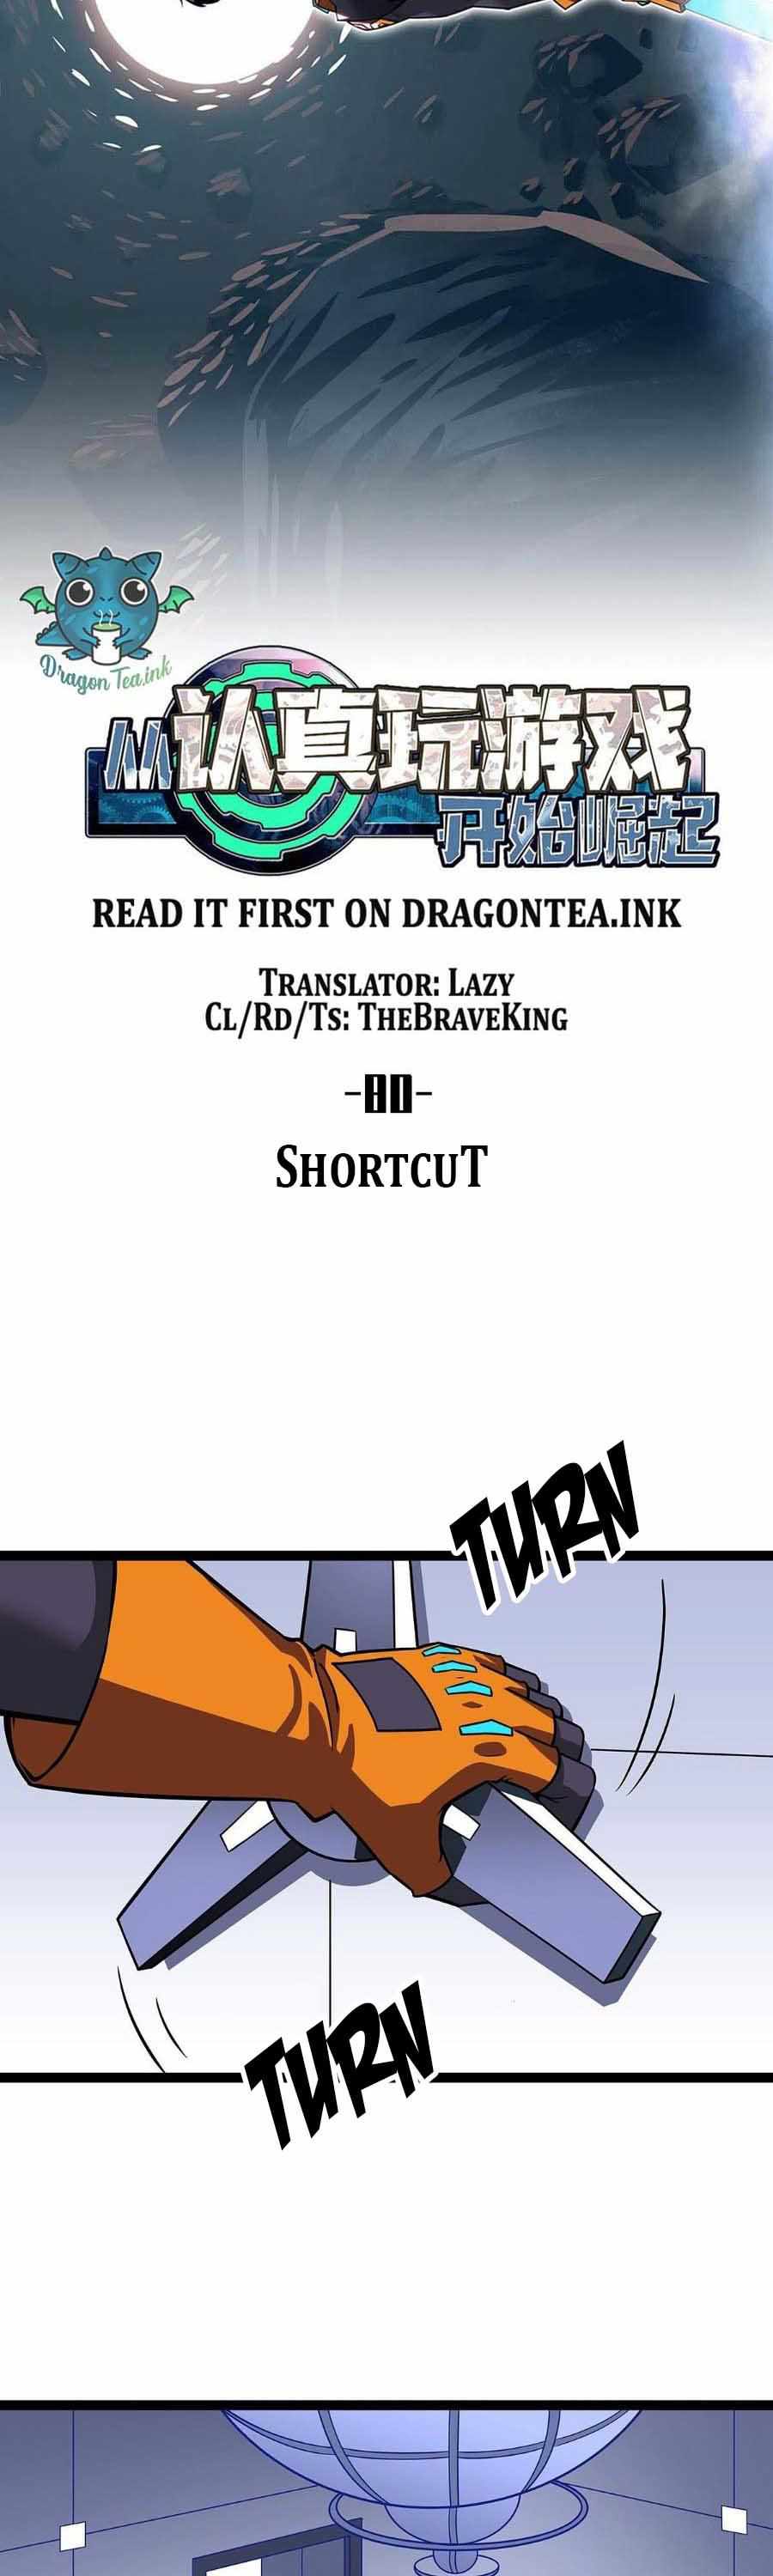 It All Starts With Playing Game Seriously - chapter 106 - Dragon Tea